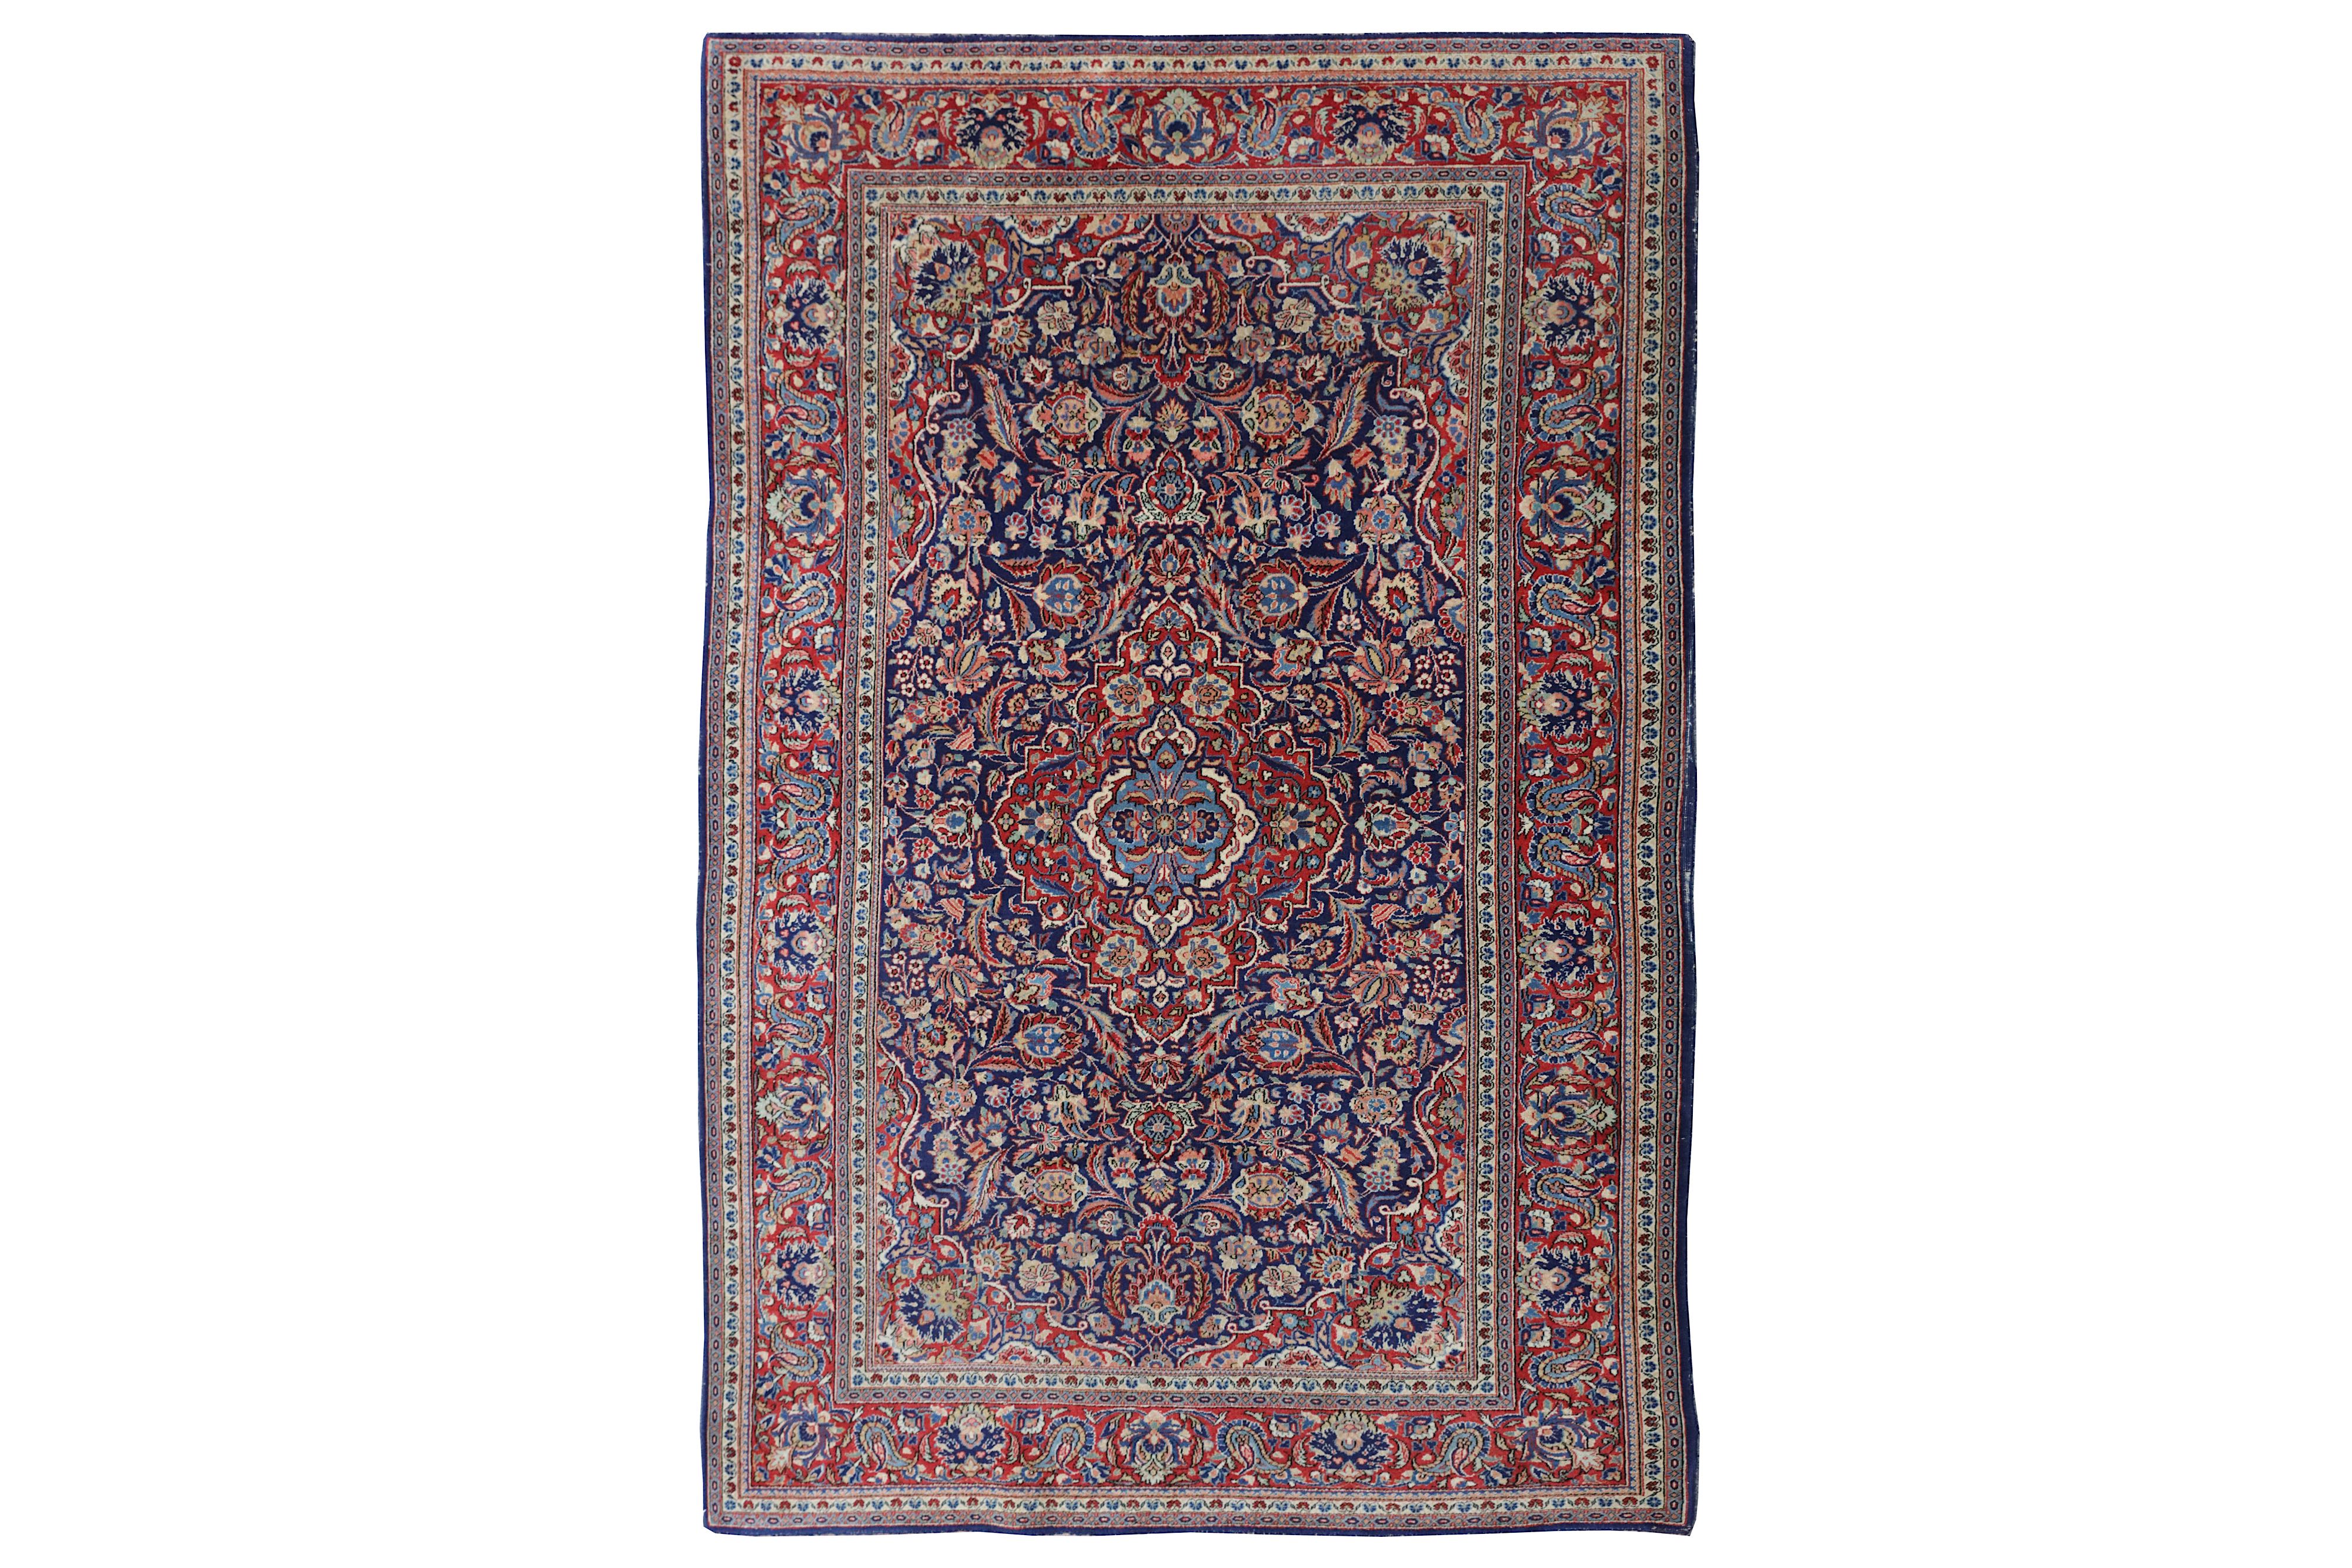 A VERY FINE KASHAN RUG, CETRAL PERSIA